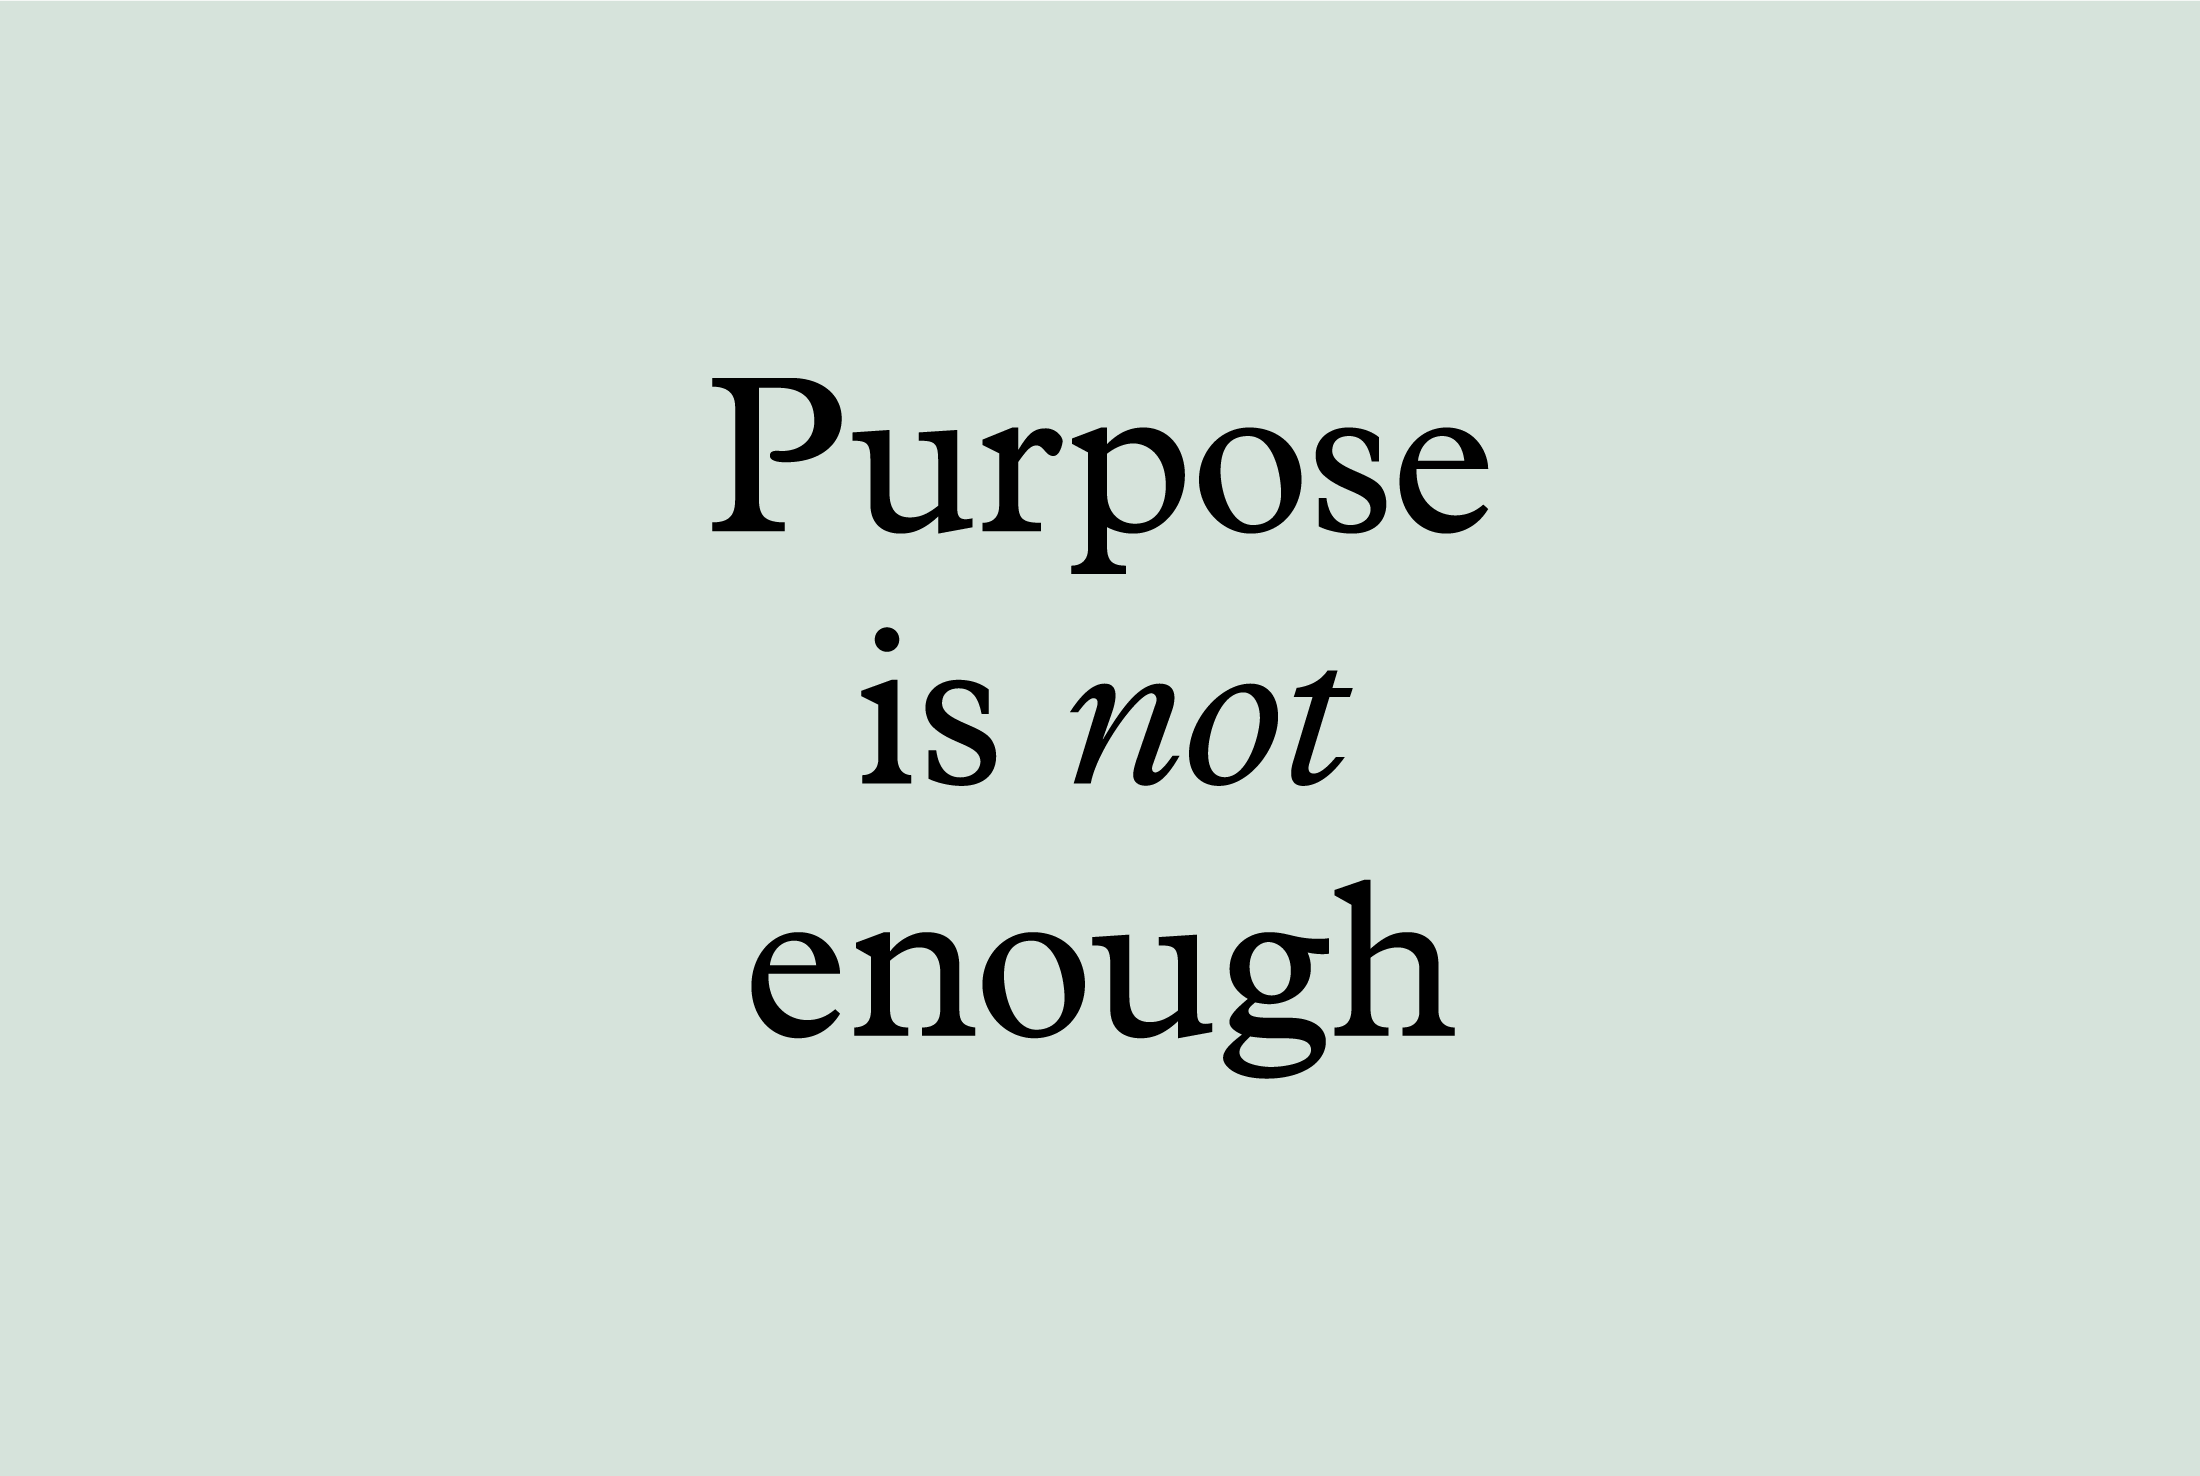 Purpose is not enough